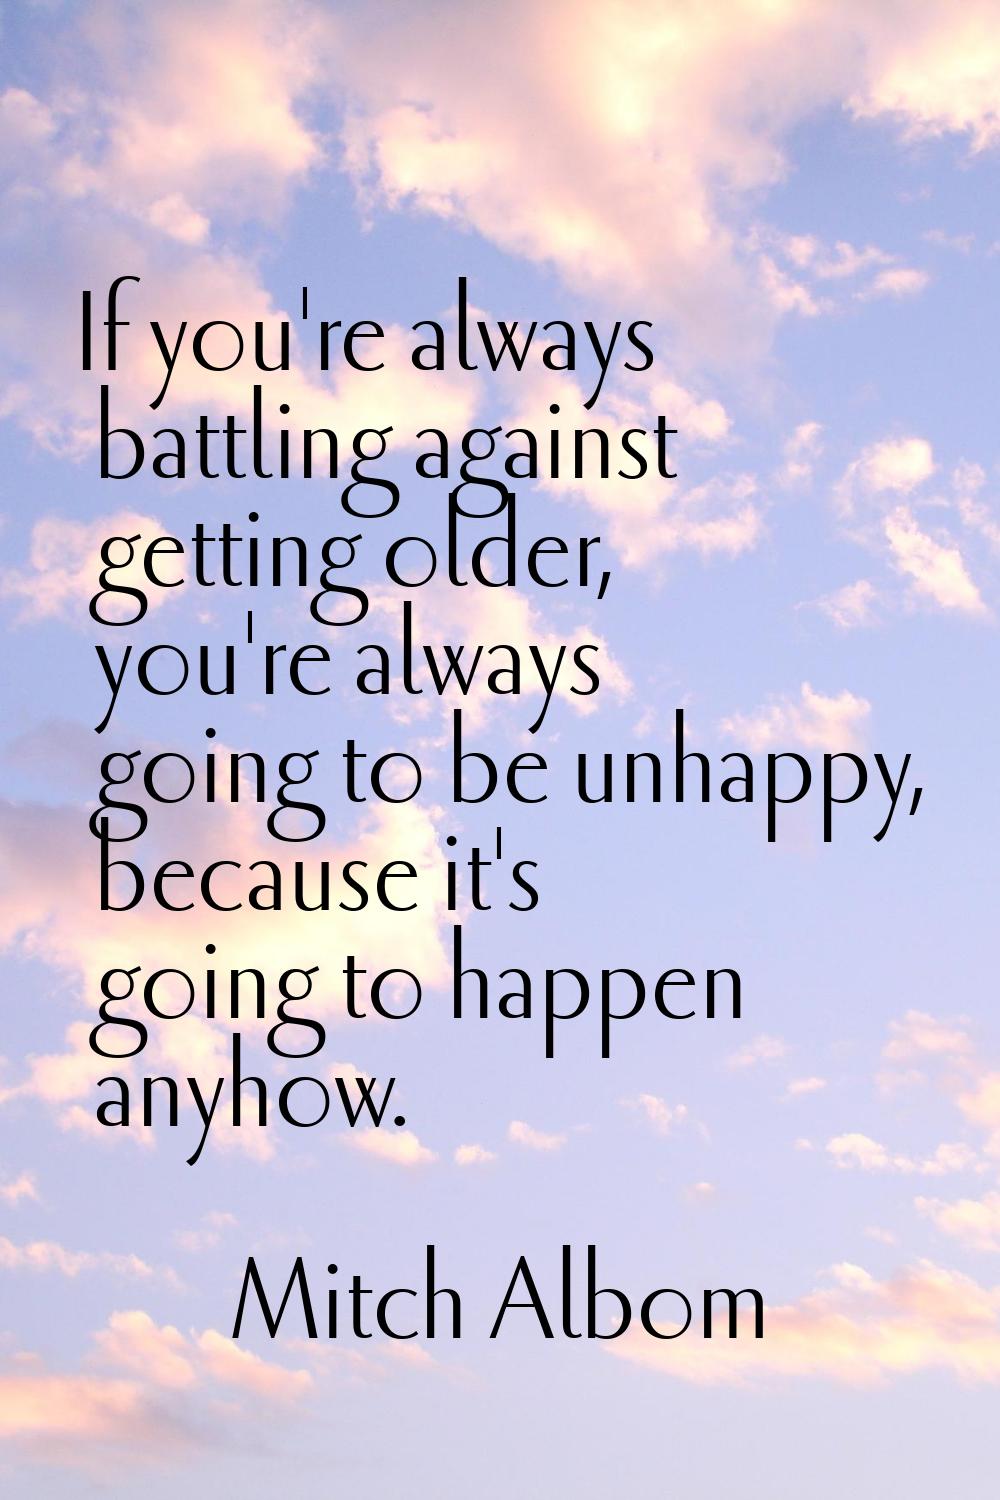 If you're always battling against getting older, you're always going to be unhappy, because it's go